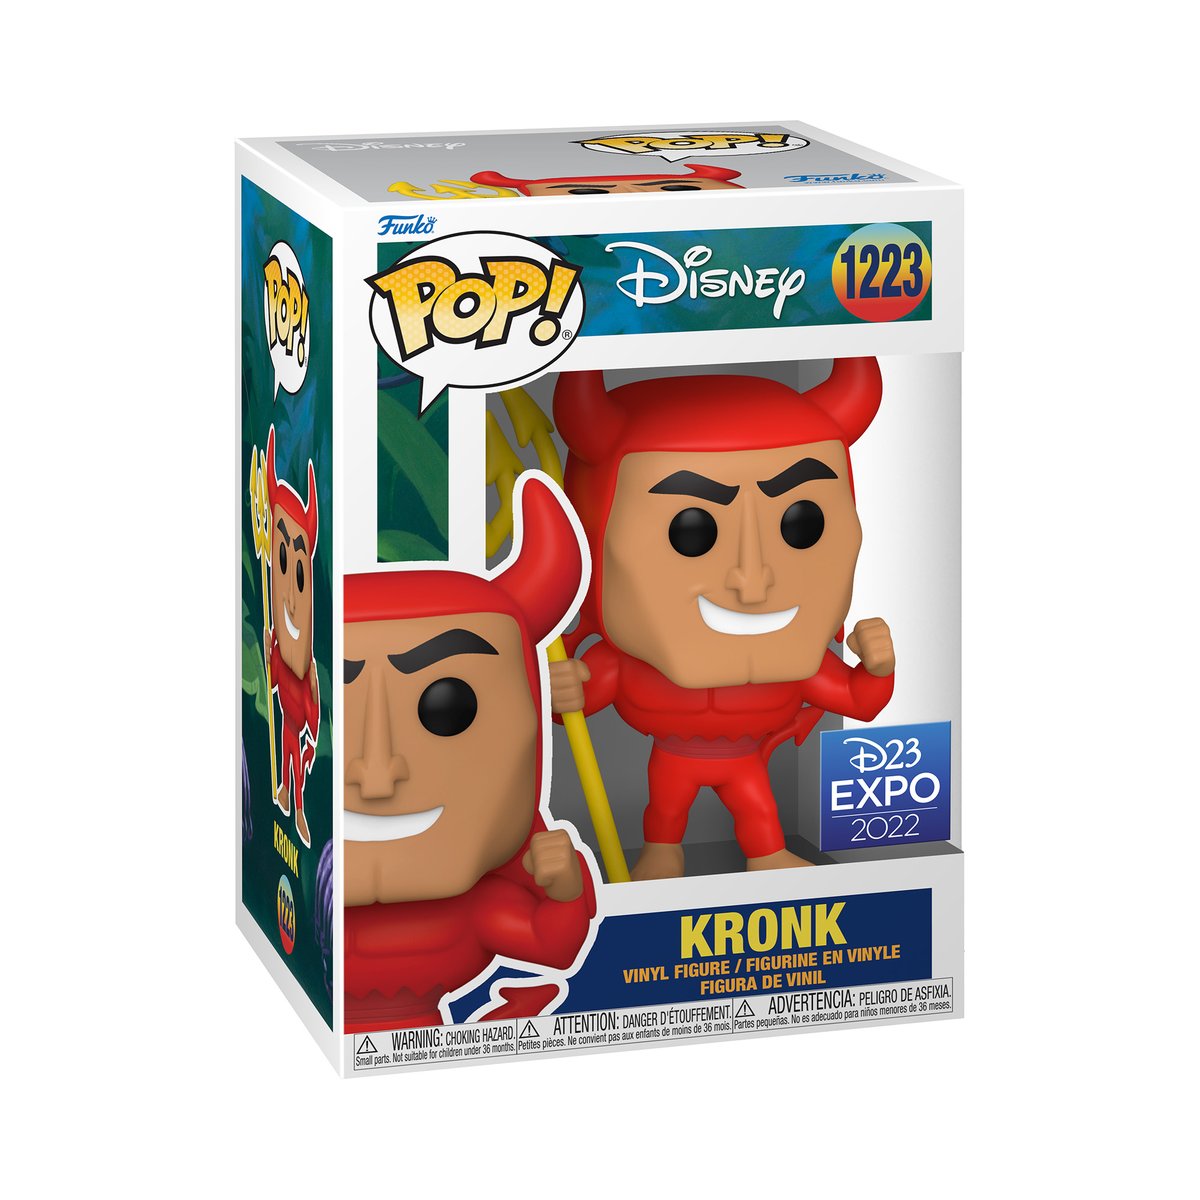 RT and follow @OriginalFunko for the chance to WIN the #D23Expo exclusive Kronk POP! #Funko #FunkoPOP #Giveaway #D23